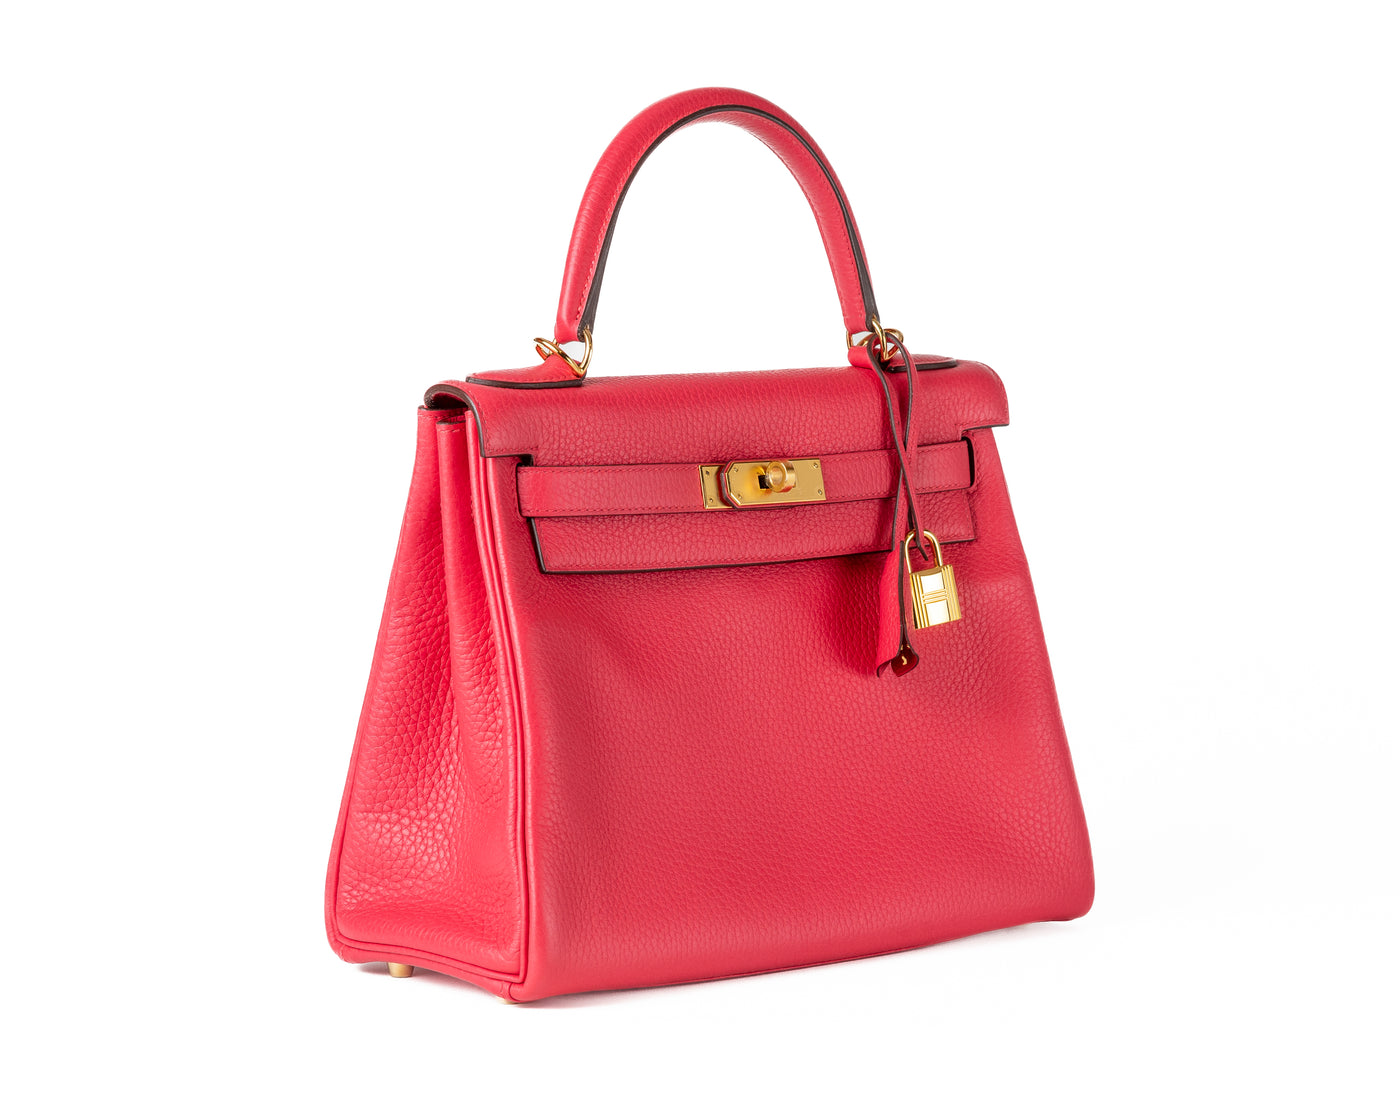 Indulge in luxury with this authentic Hermès 28 cm Rose Pink Clemence Kelly